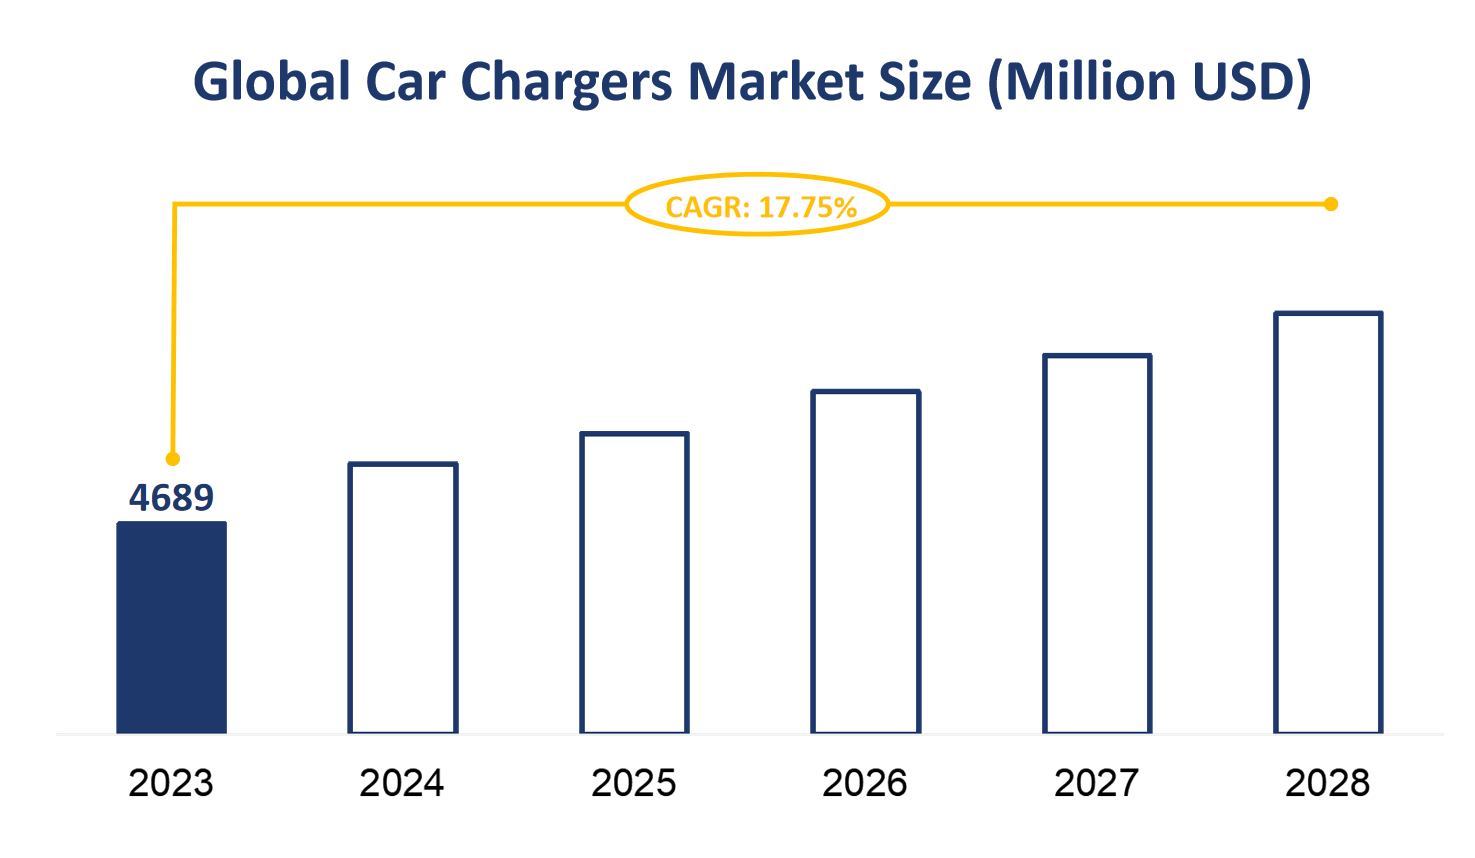 Global Car Chargers Market Size (Million USD)